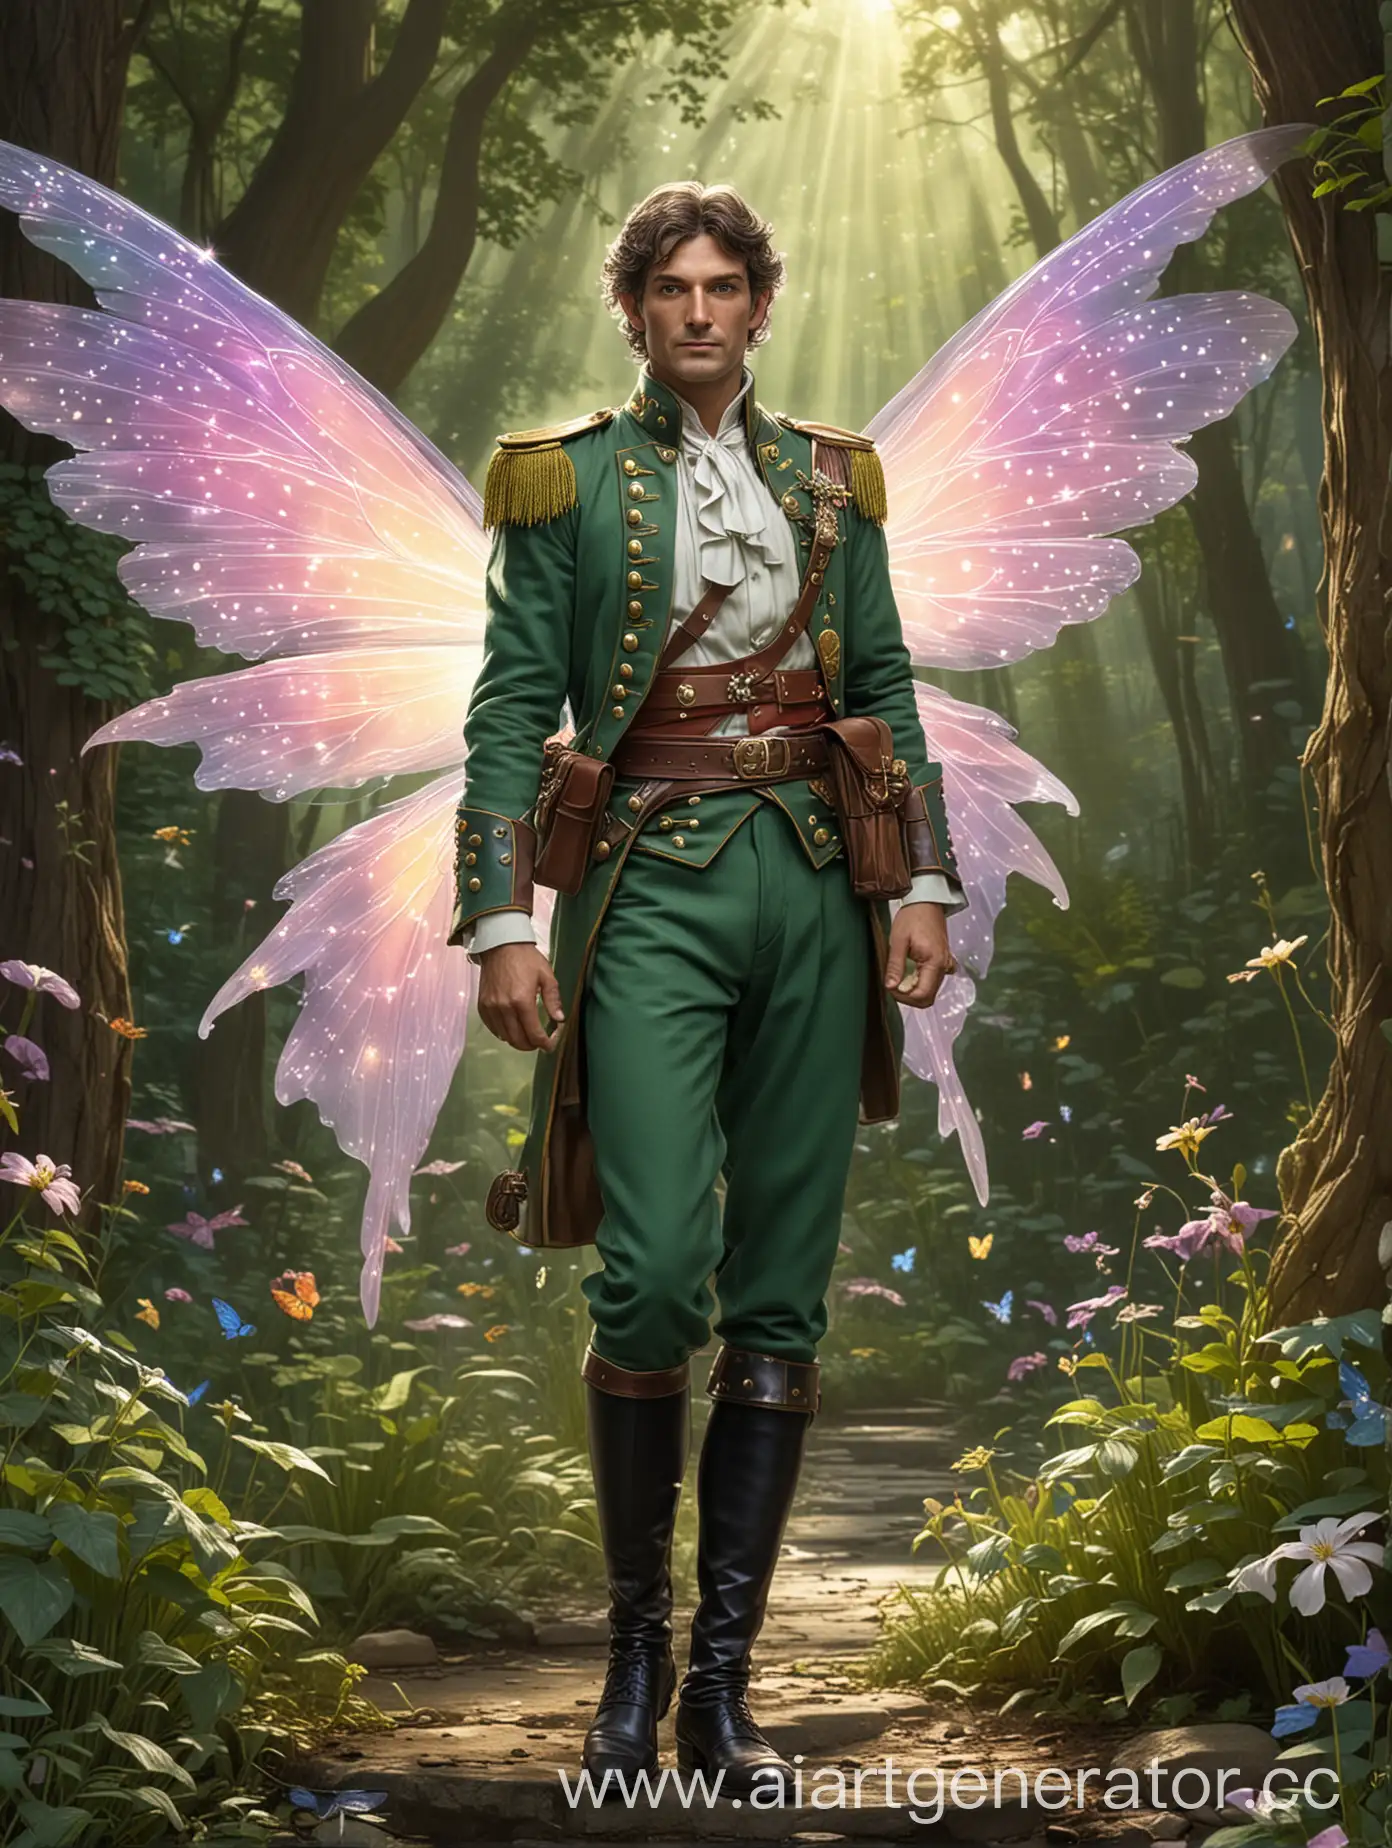 Colonel-Moran-Fairy-in-Enchanted-Forest